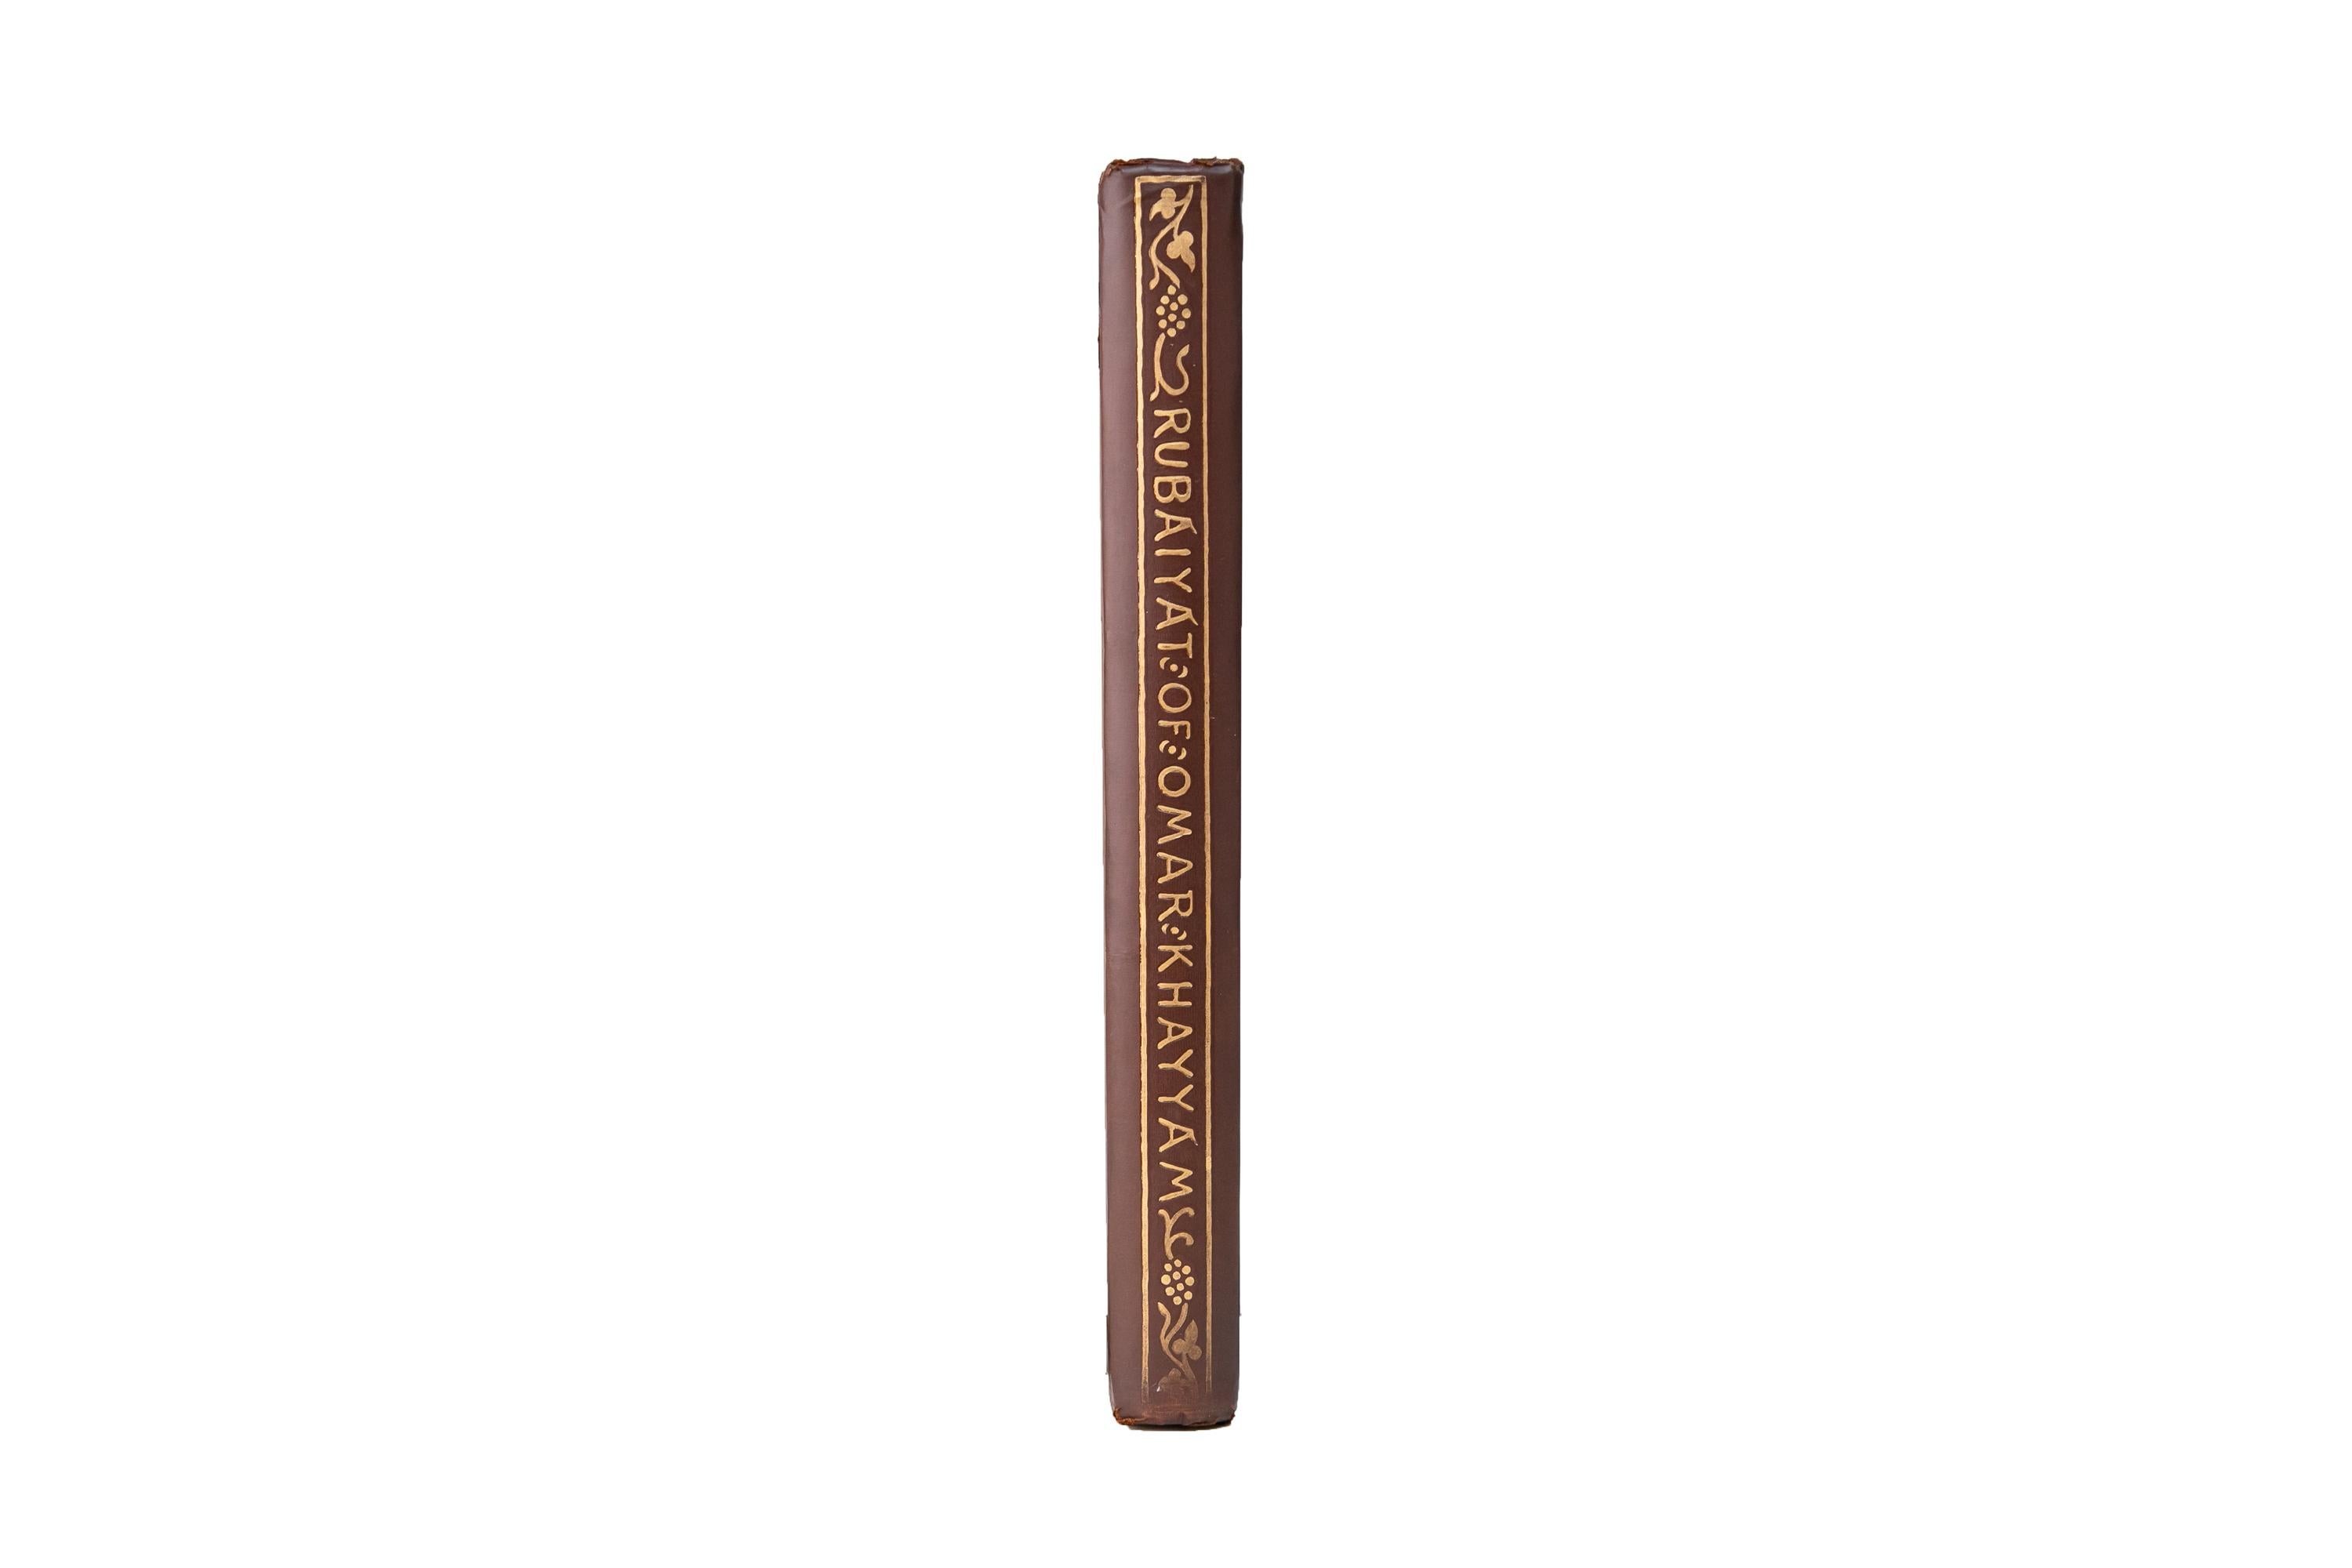 1 Volume. Edward Fitzgerald, Rubáiyát of Omar Khayyám First Edition. Bound in full brown cloth with the covers displaying decorative title lettering, floral detailing, and other decorations, all gilt-tooled. The spine displays gilt-tooled label